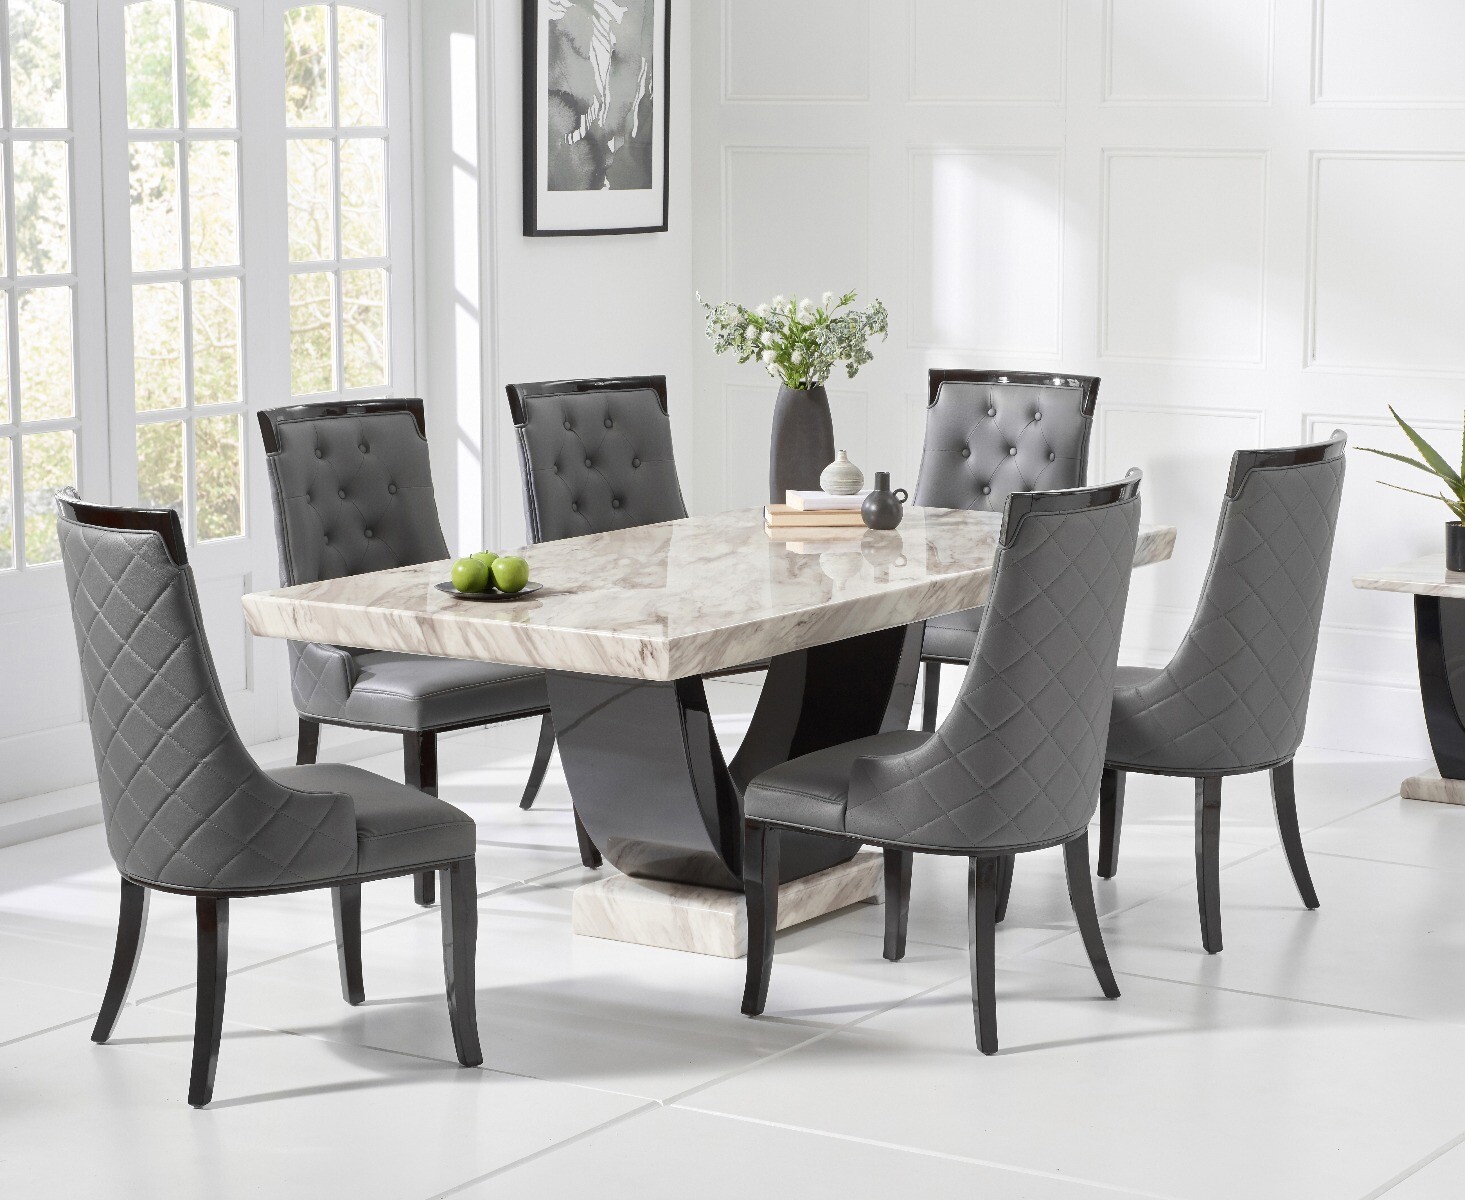 Raphael 170cm Cream And Black Pedestal Marble Dining Table With 6 Cream Francesca Chairs